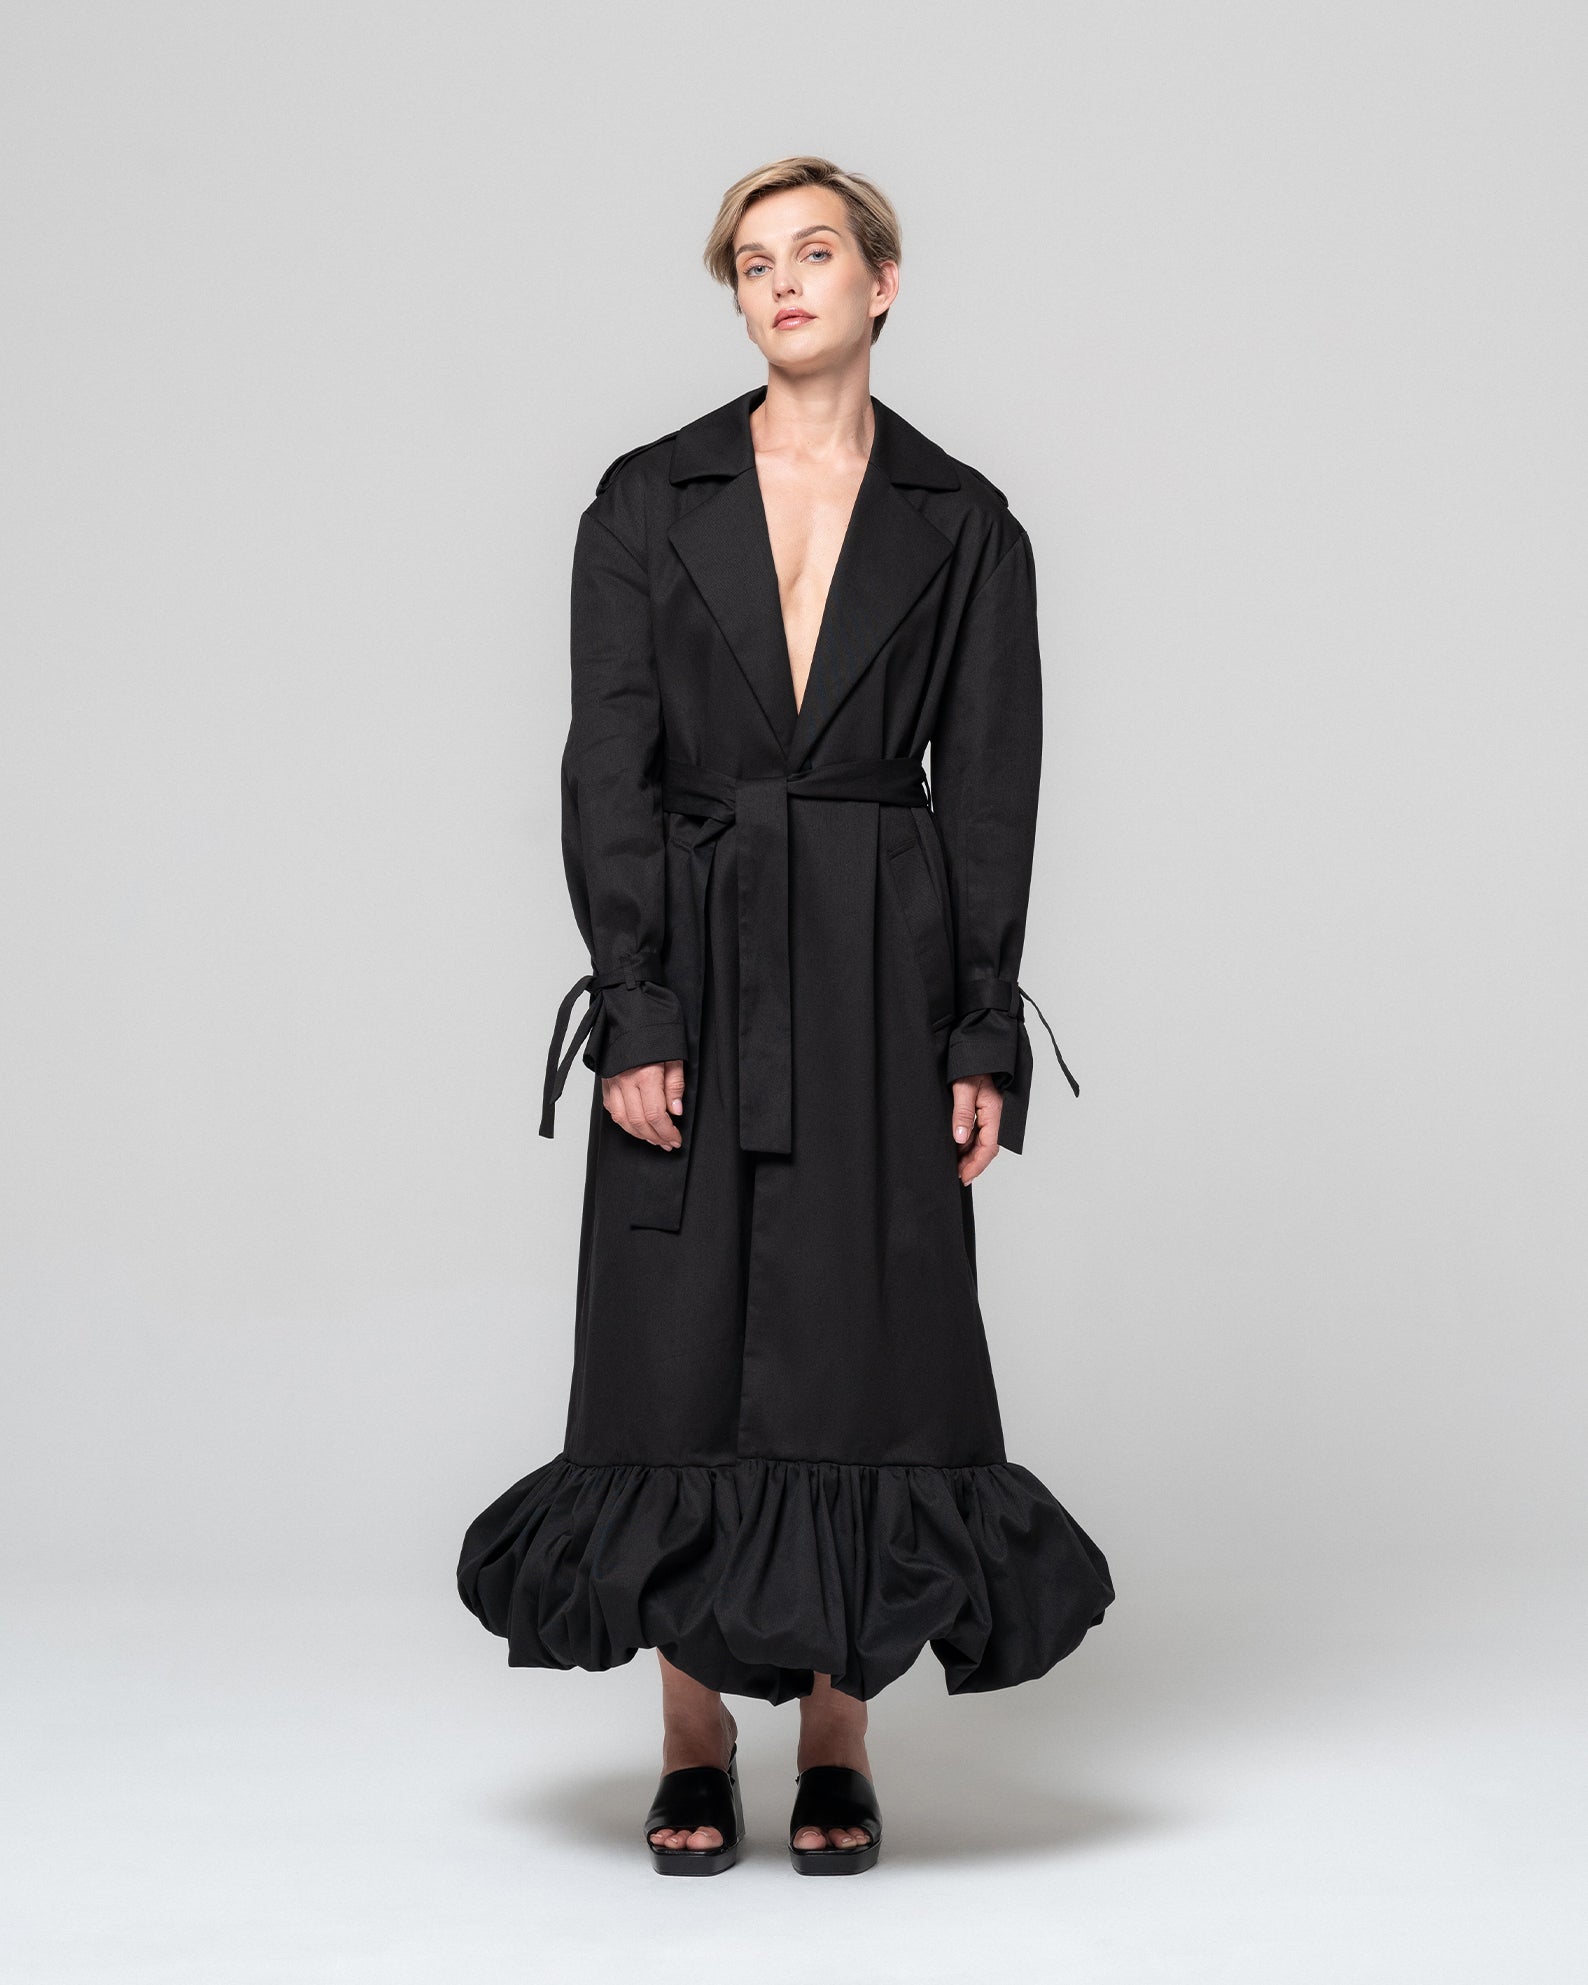 TAMY BLACK TRENCH COAT - RONI HELOU